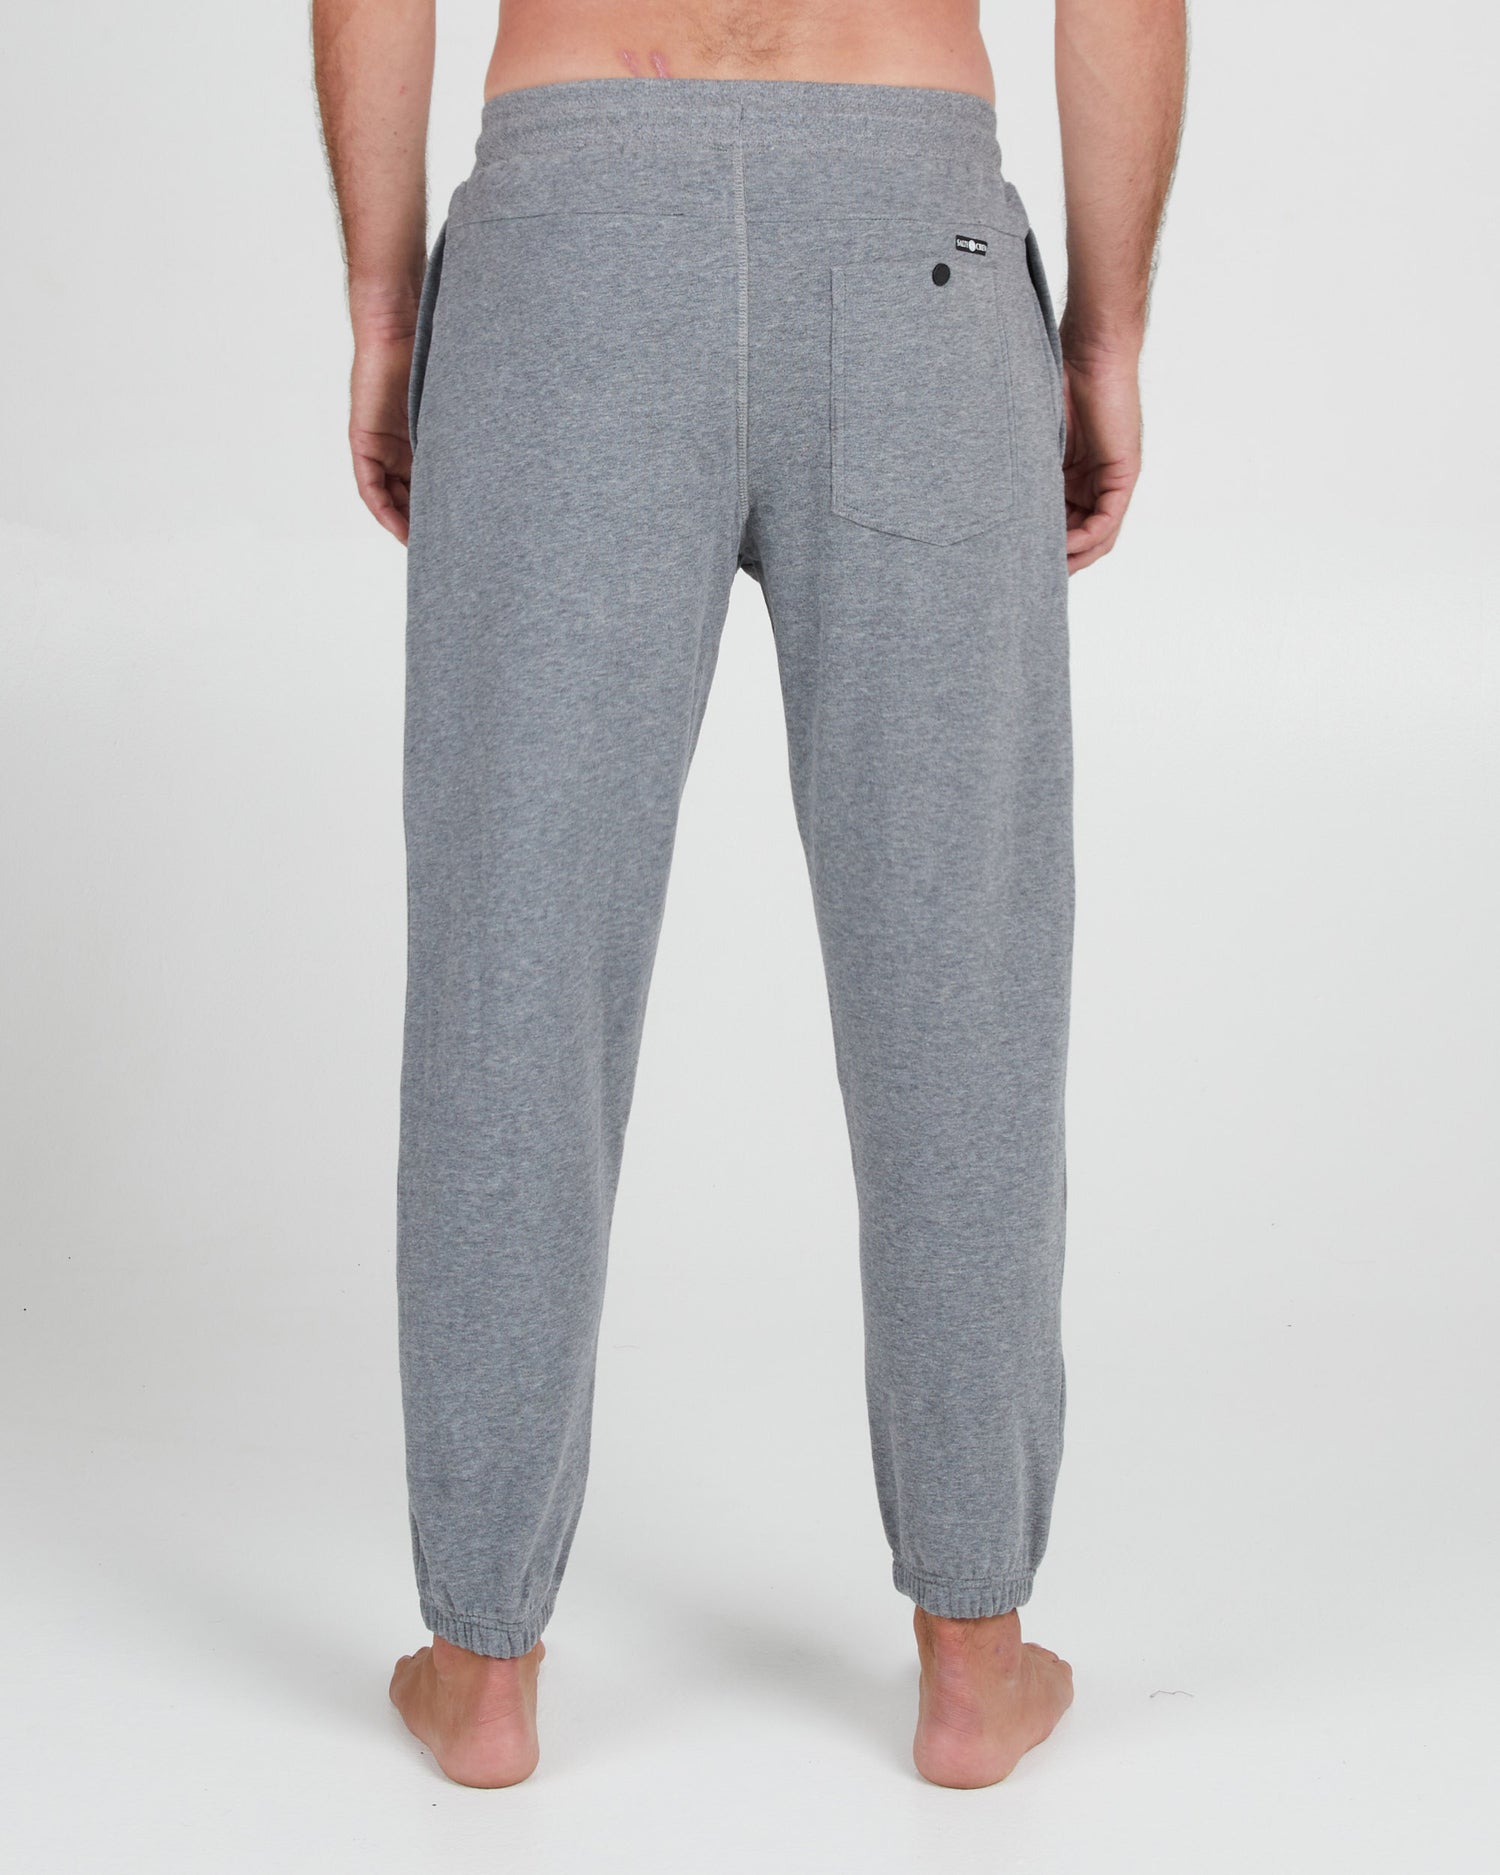 On body back of the Dockside Grey/Heather Sweatpant